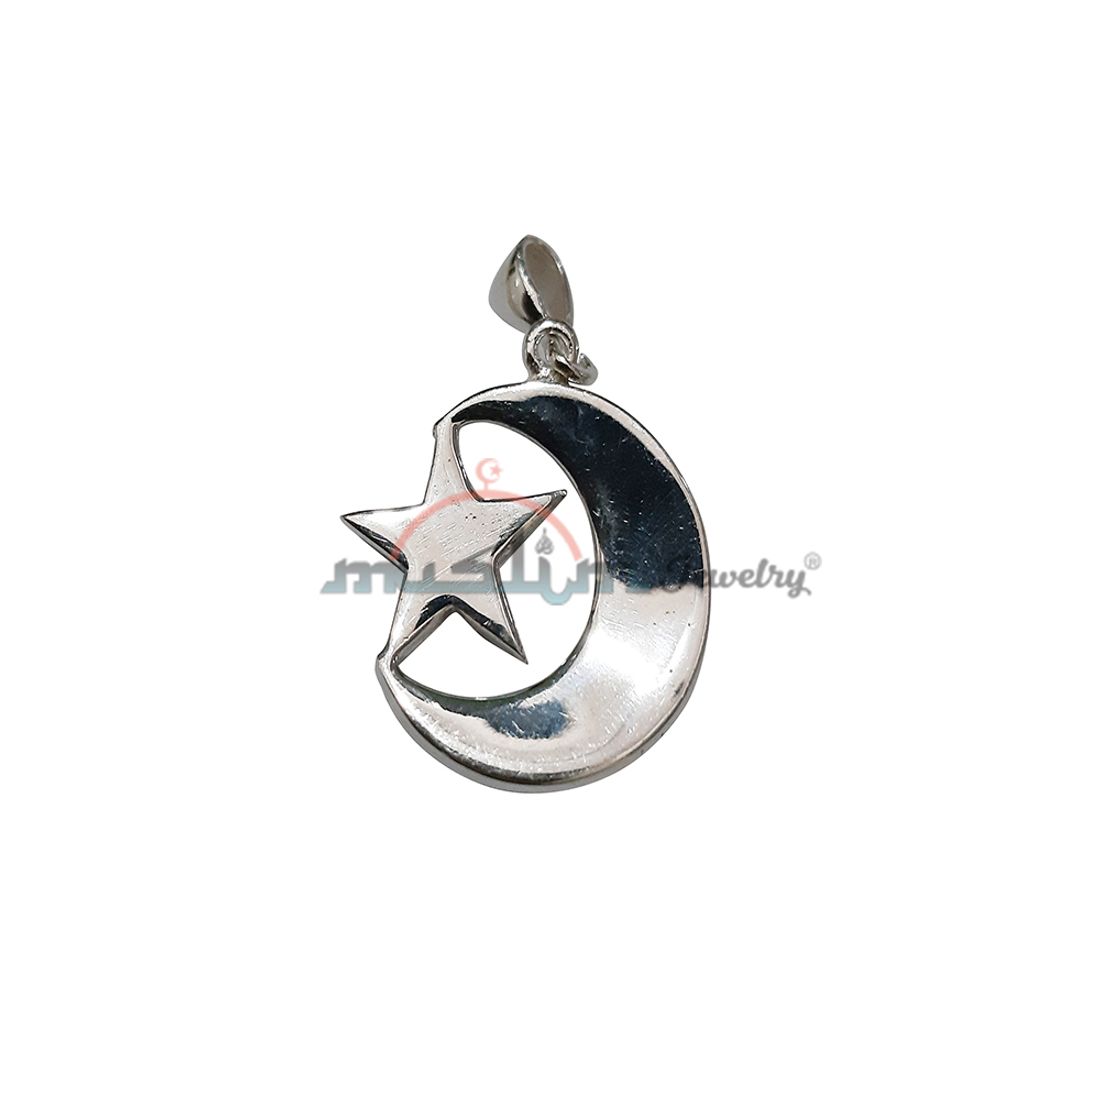 Large 925 St. Silver Islamic Symbol Crescent Moon & Star Pendant for Necklaces